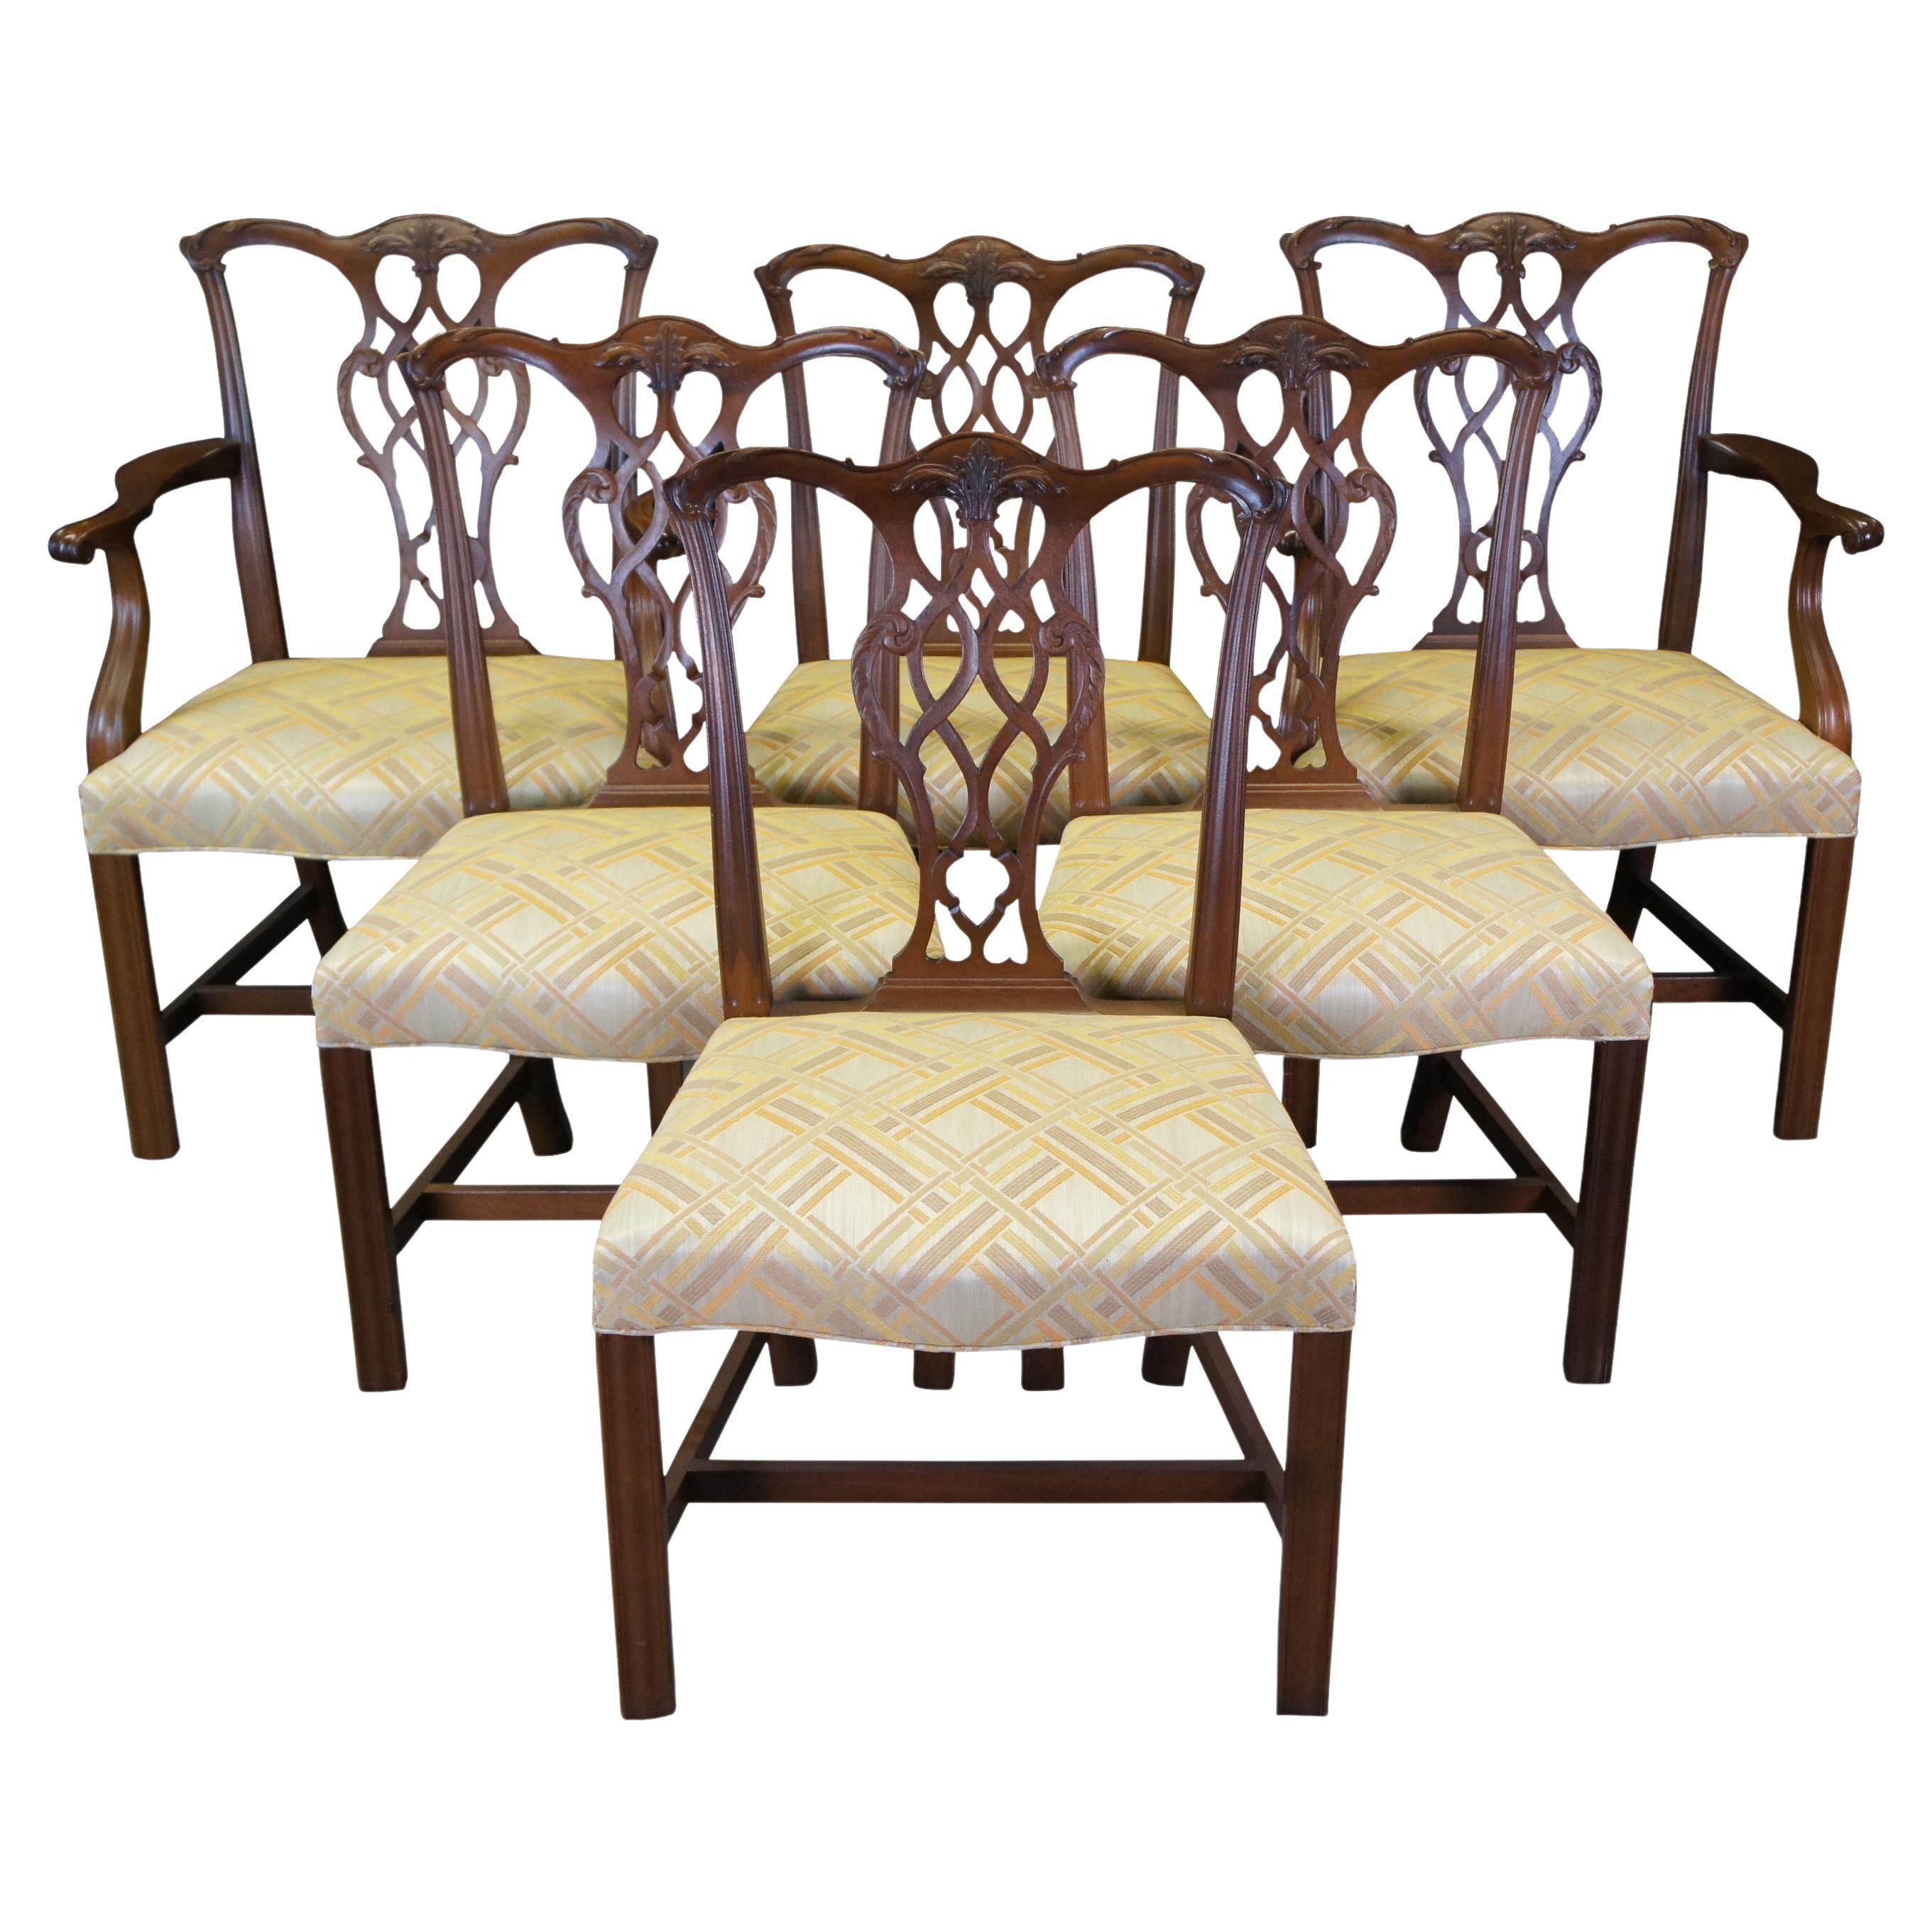 6 Baker Furniture Mahogany Chippendale Georgian Style Pretzel Back Dining Chairs